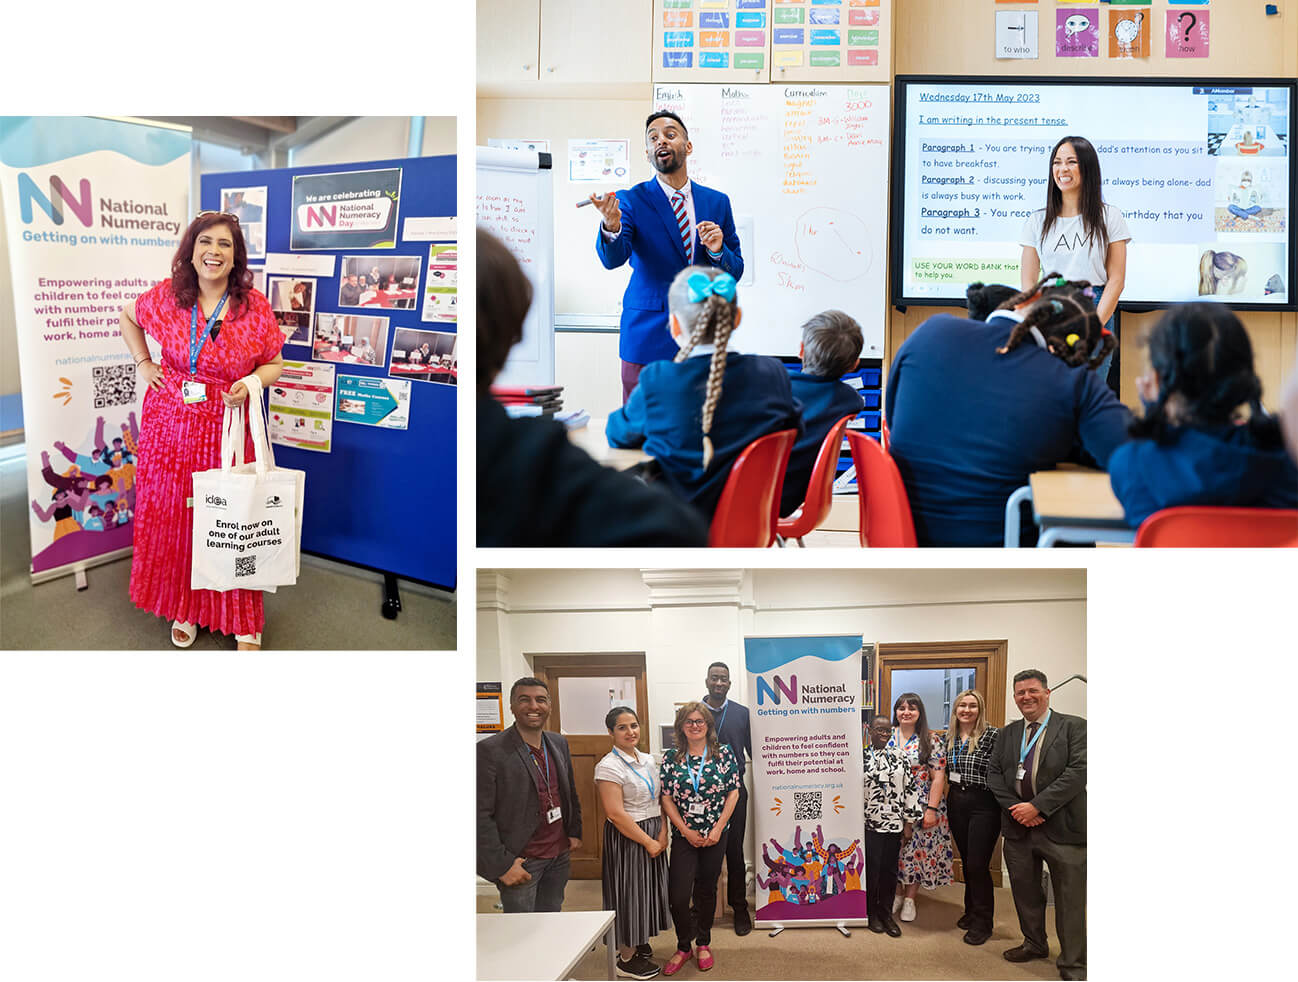 A collage of images from the charity National Numeracy.